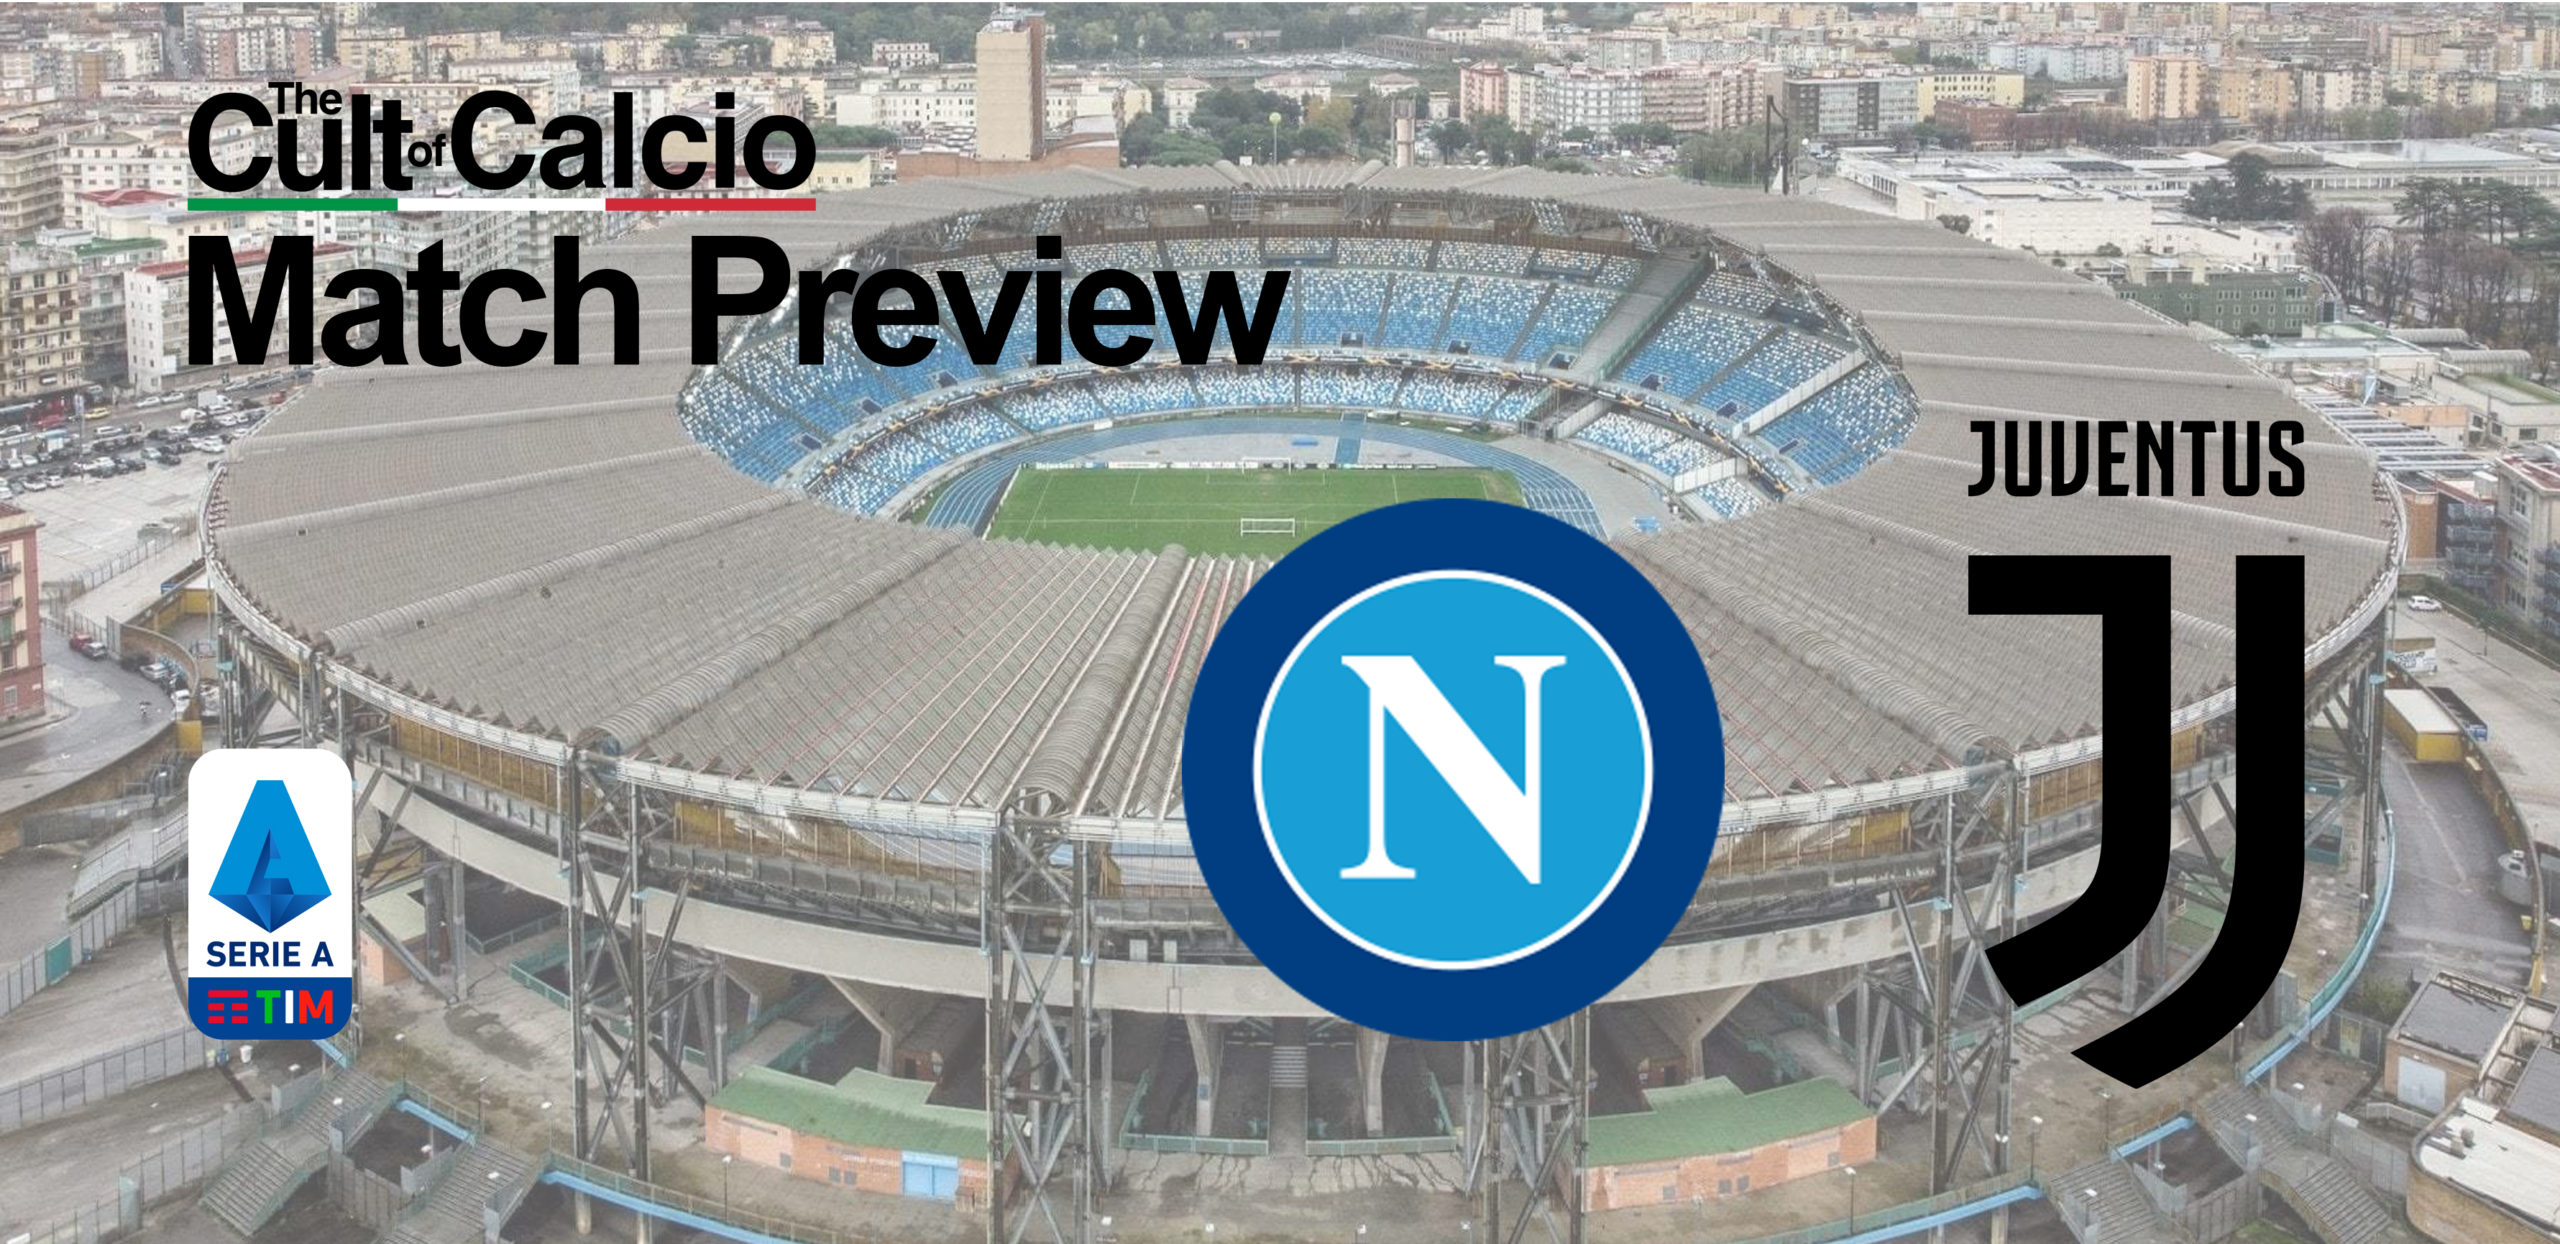 Napoli and Juventus square off at the Maradona Stadium on Saturday in Serie A Round 3 and it's time to preview the game and look at the lineups